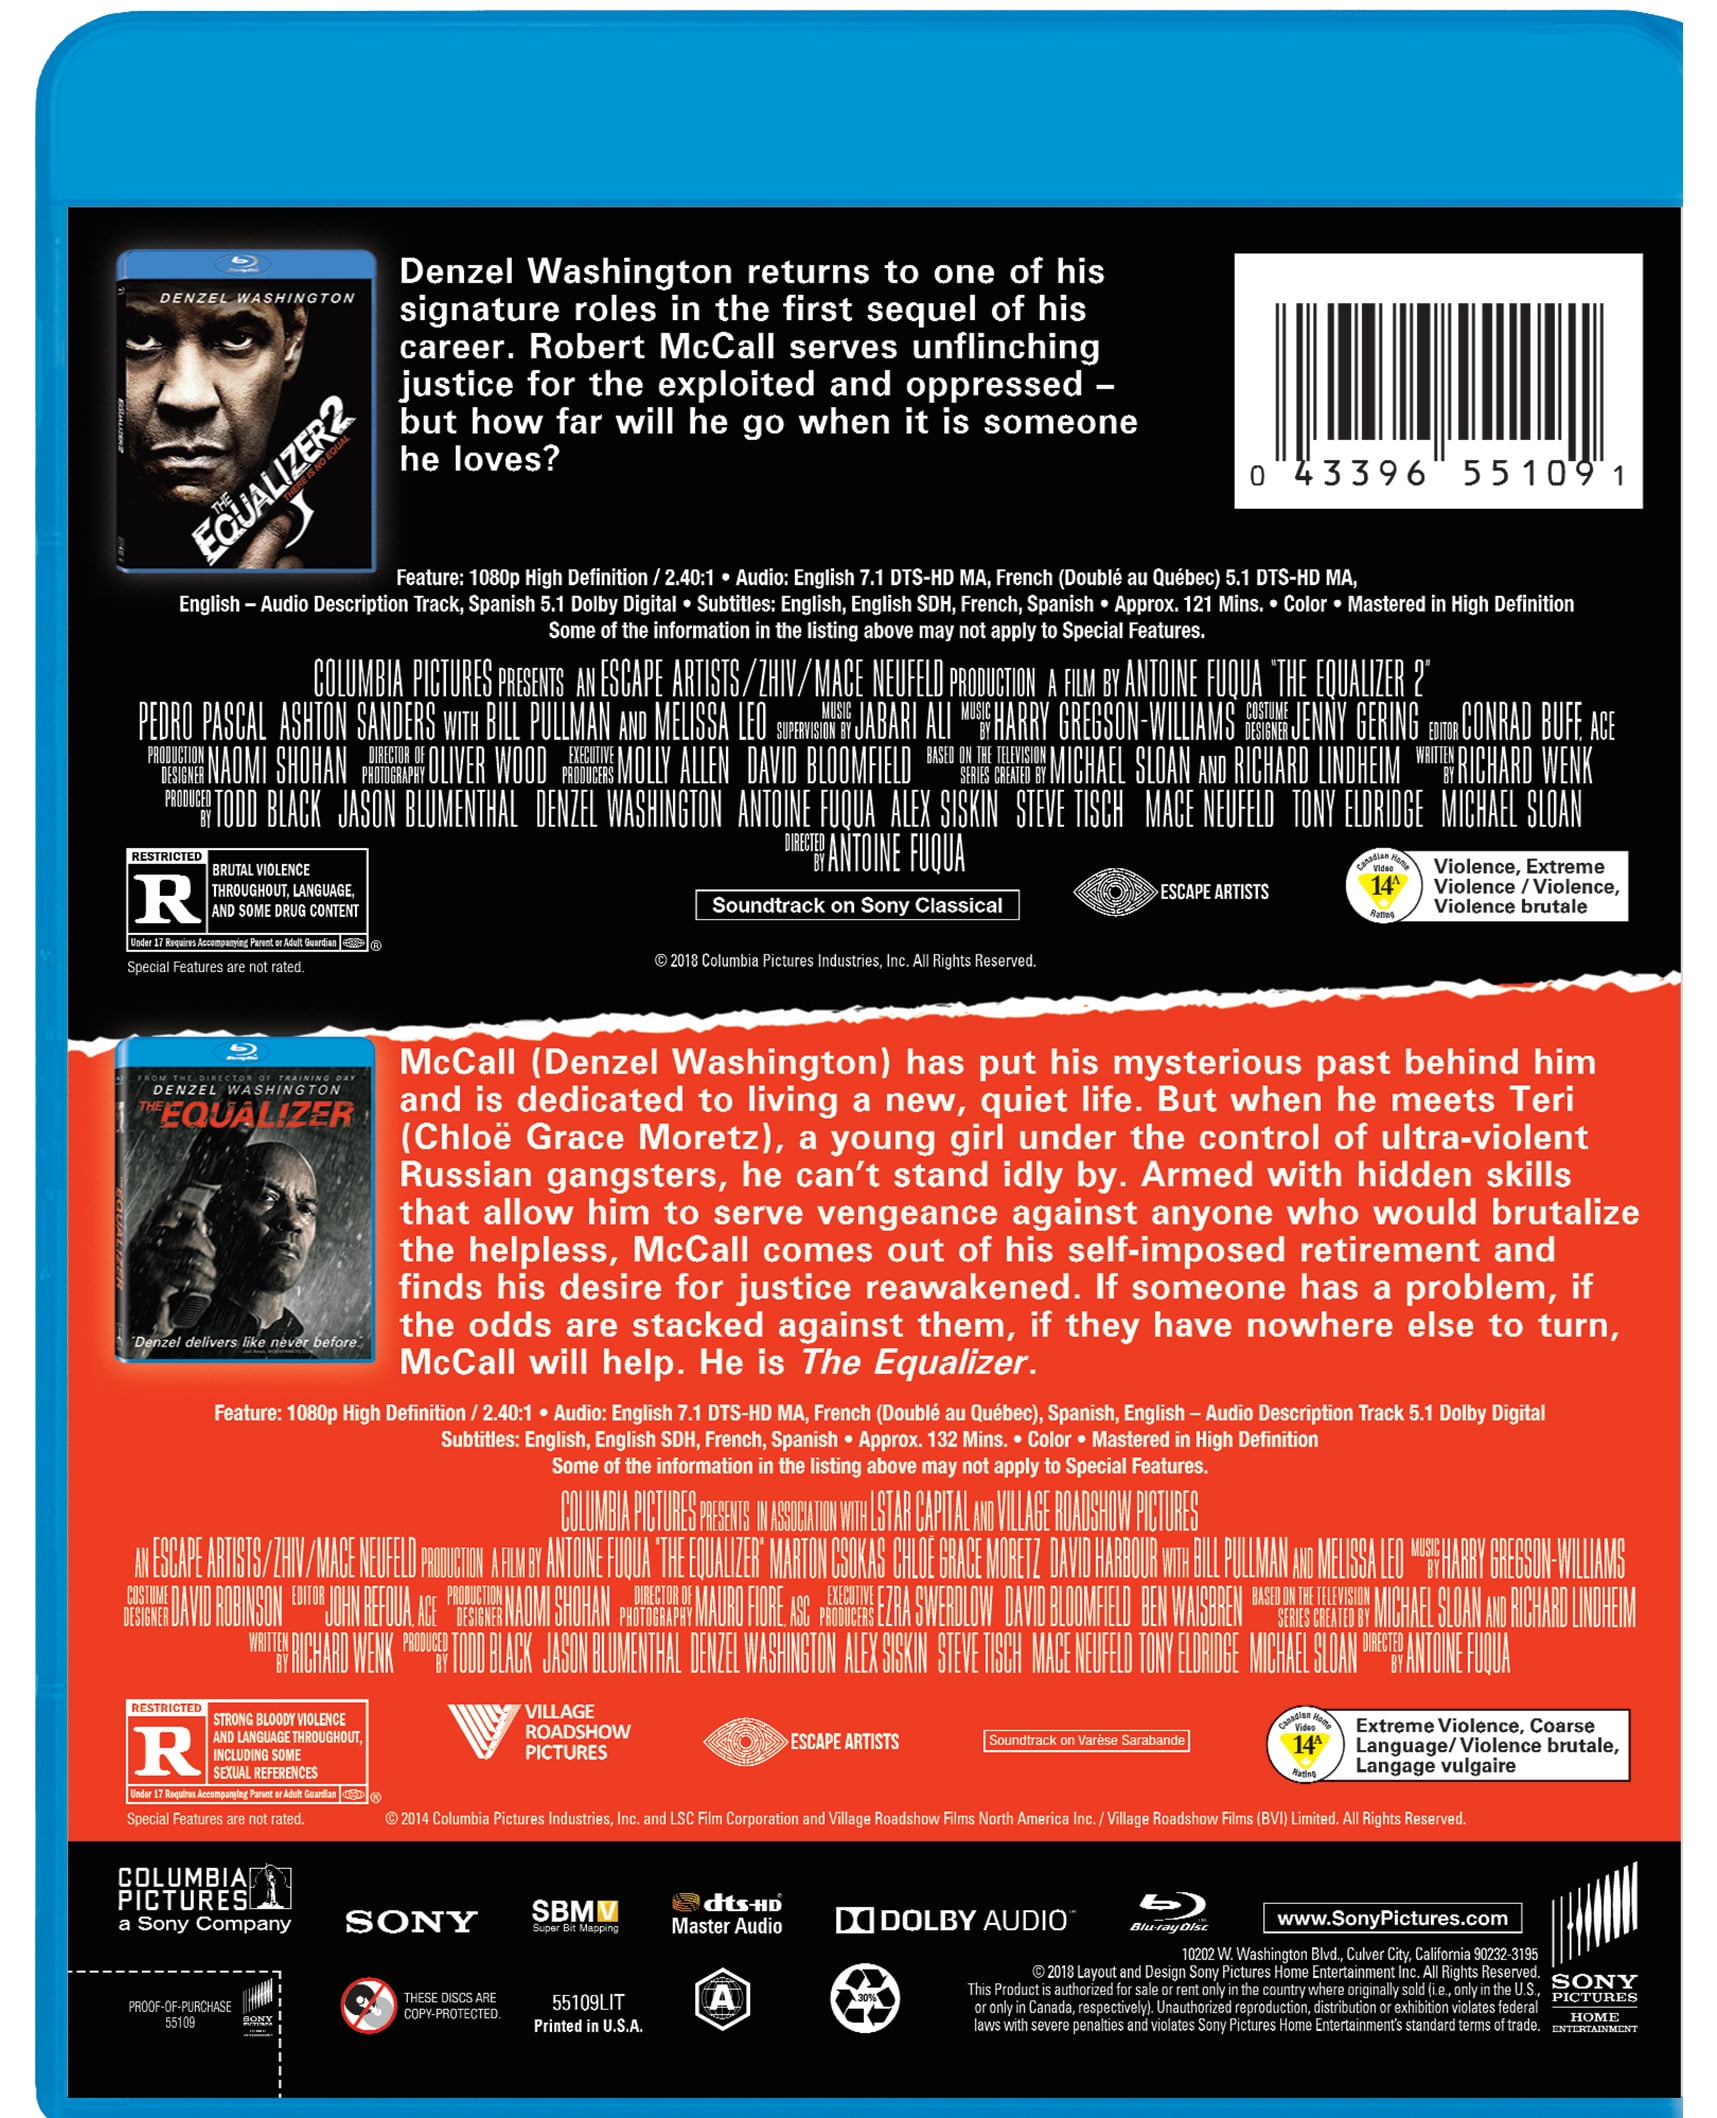 The Equalizer / The Equalizer 2 [Blu-ray]